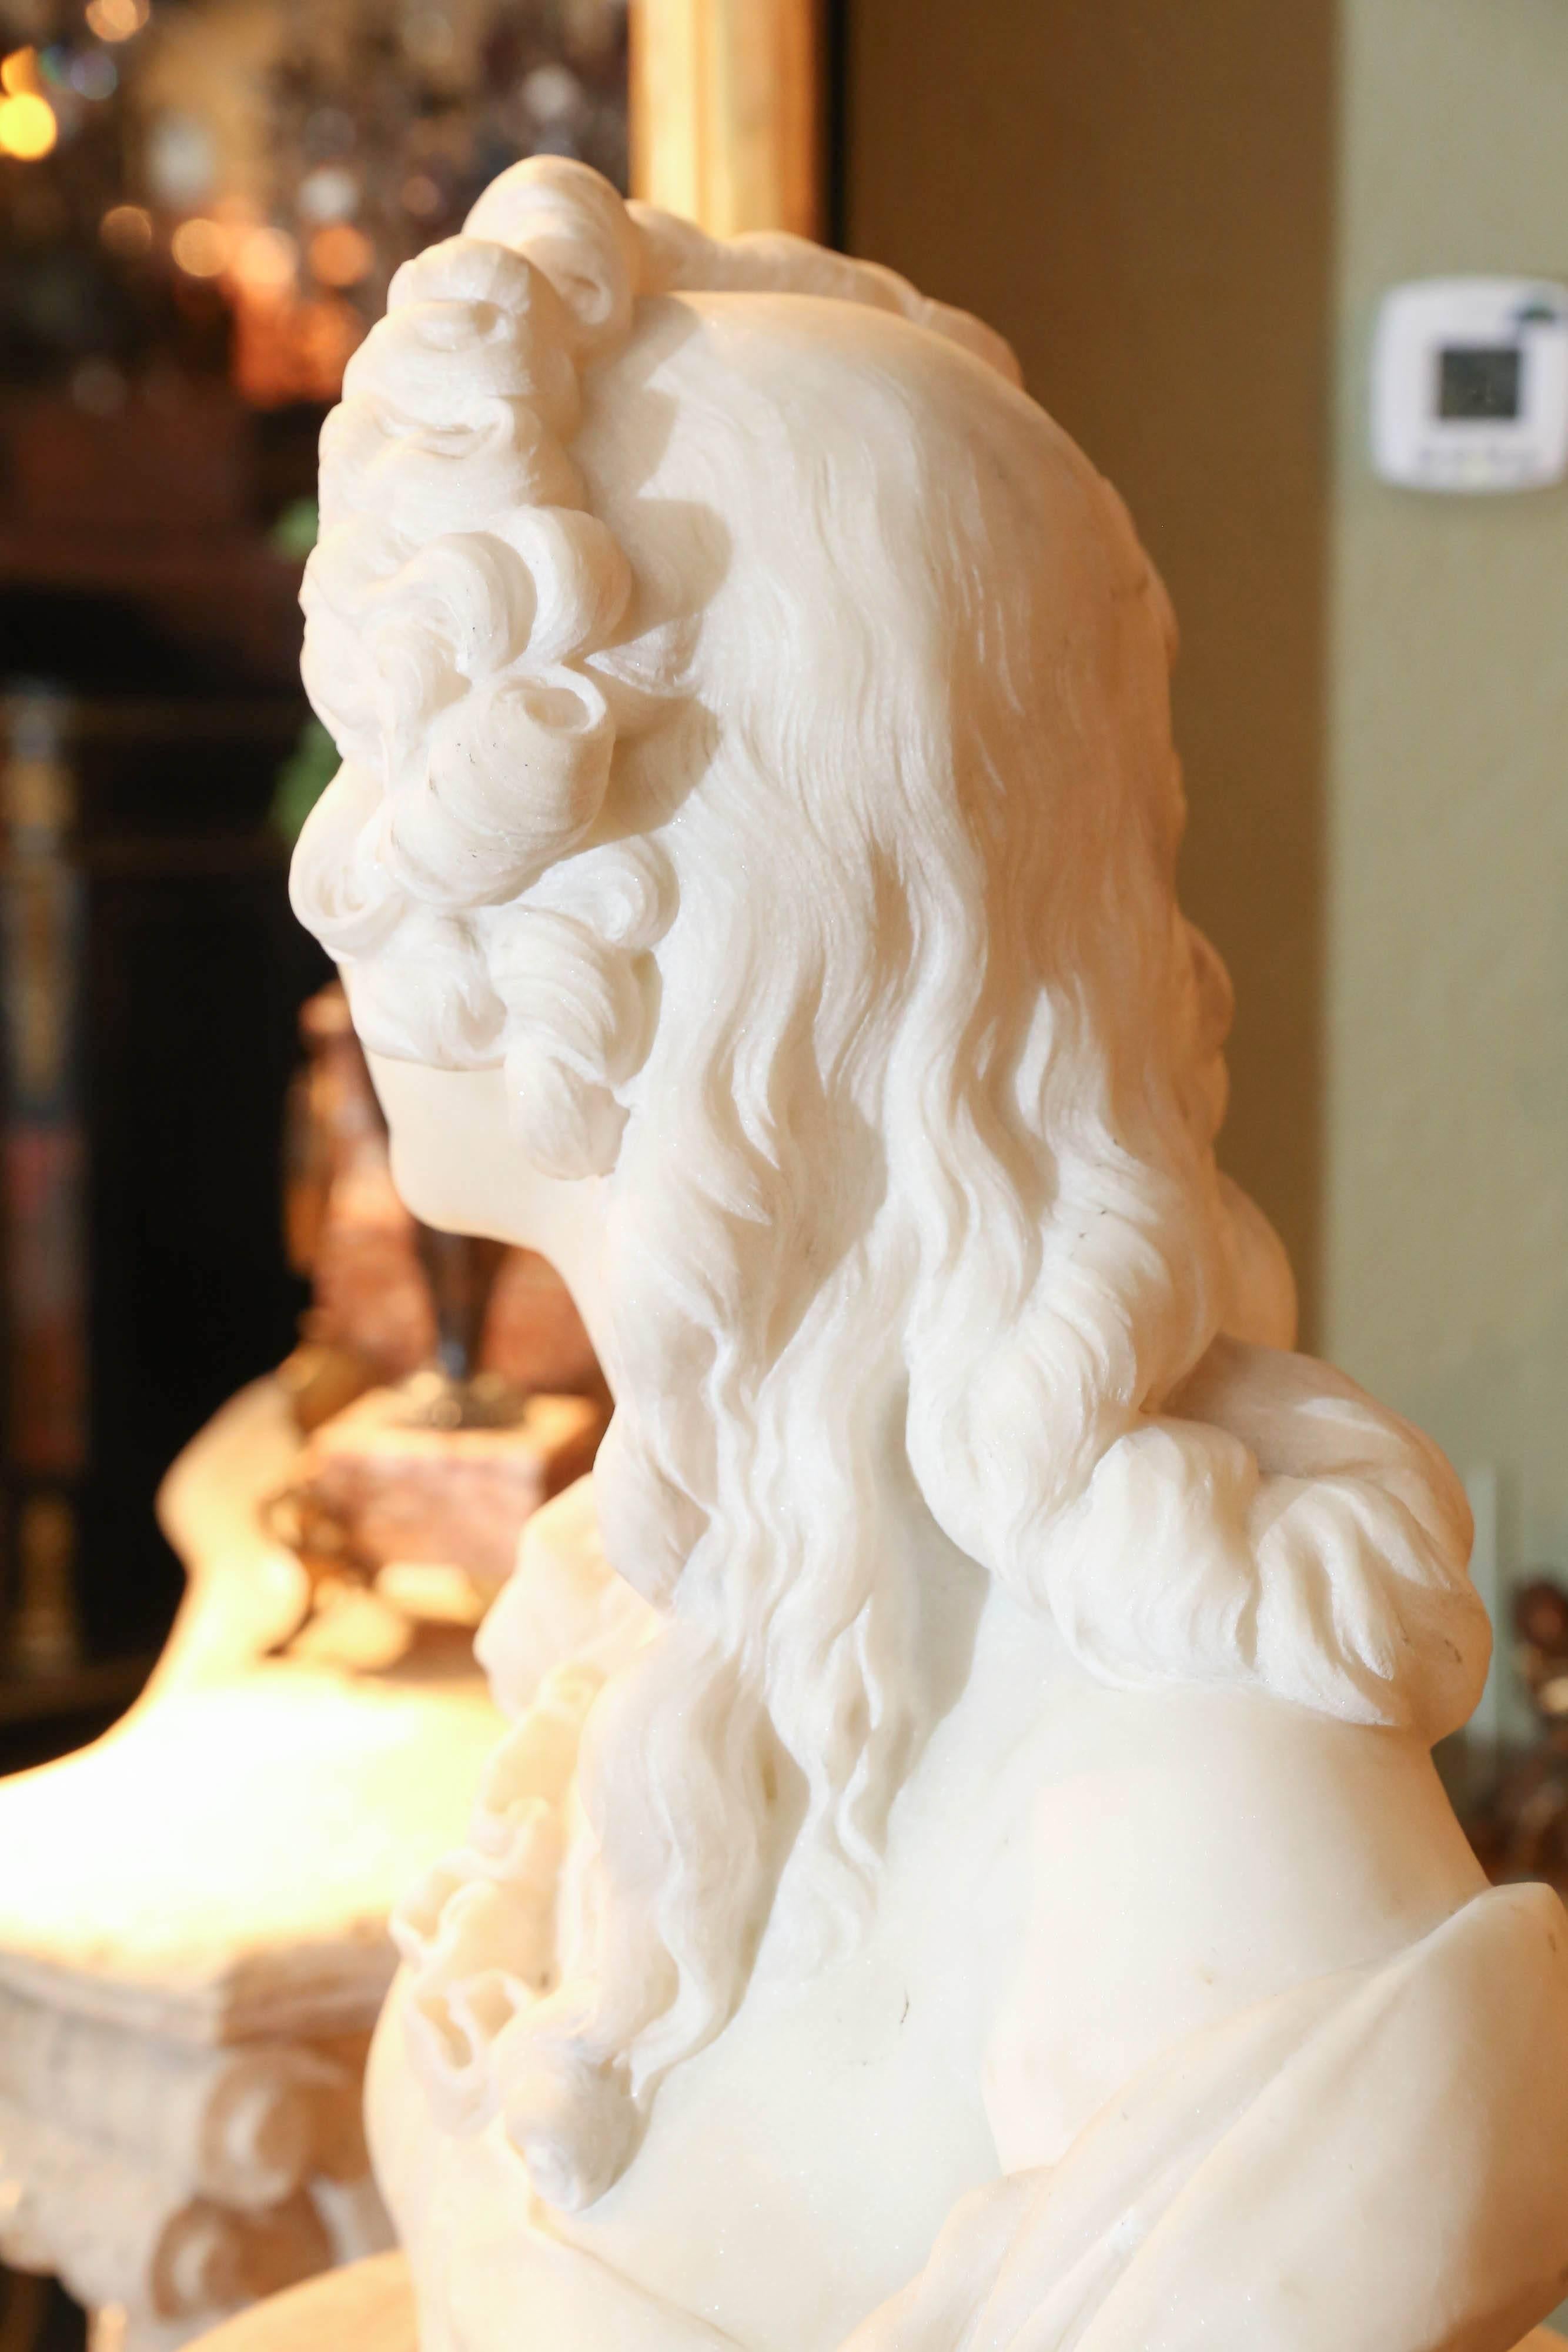 marble bust of woman